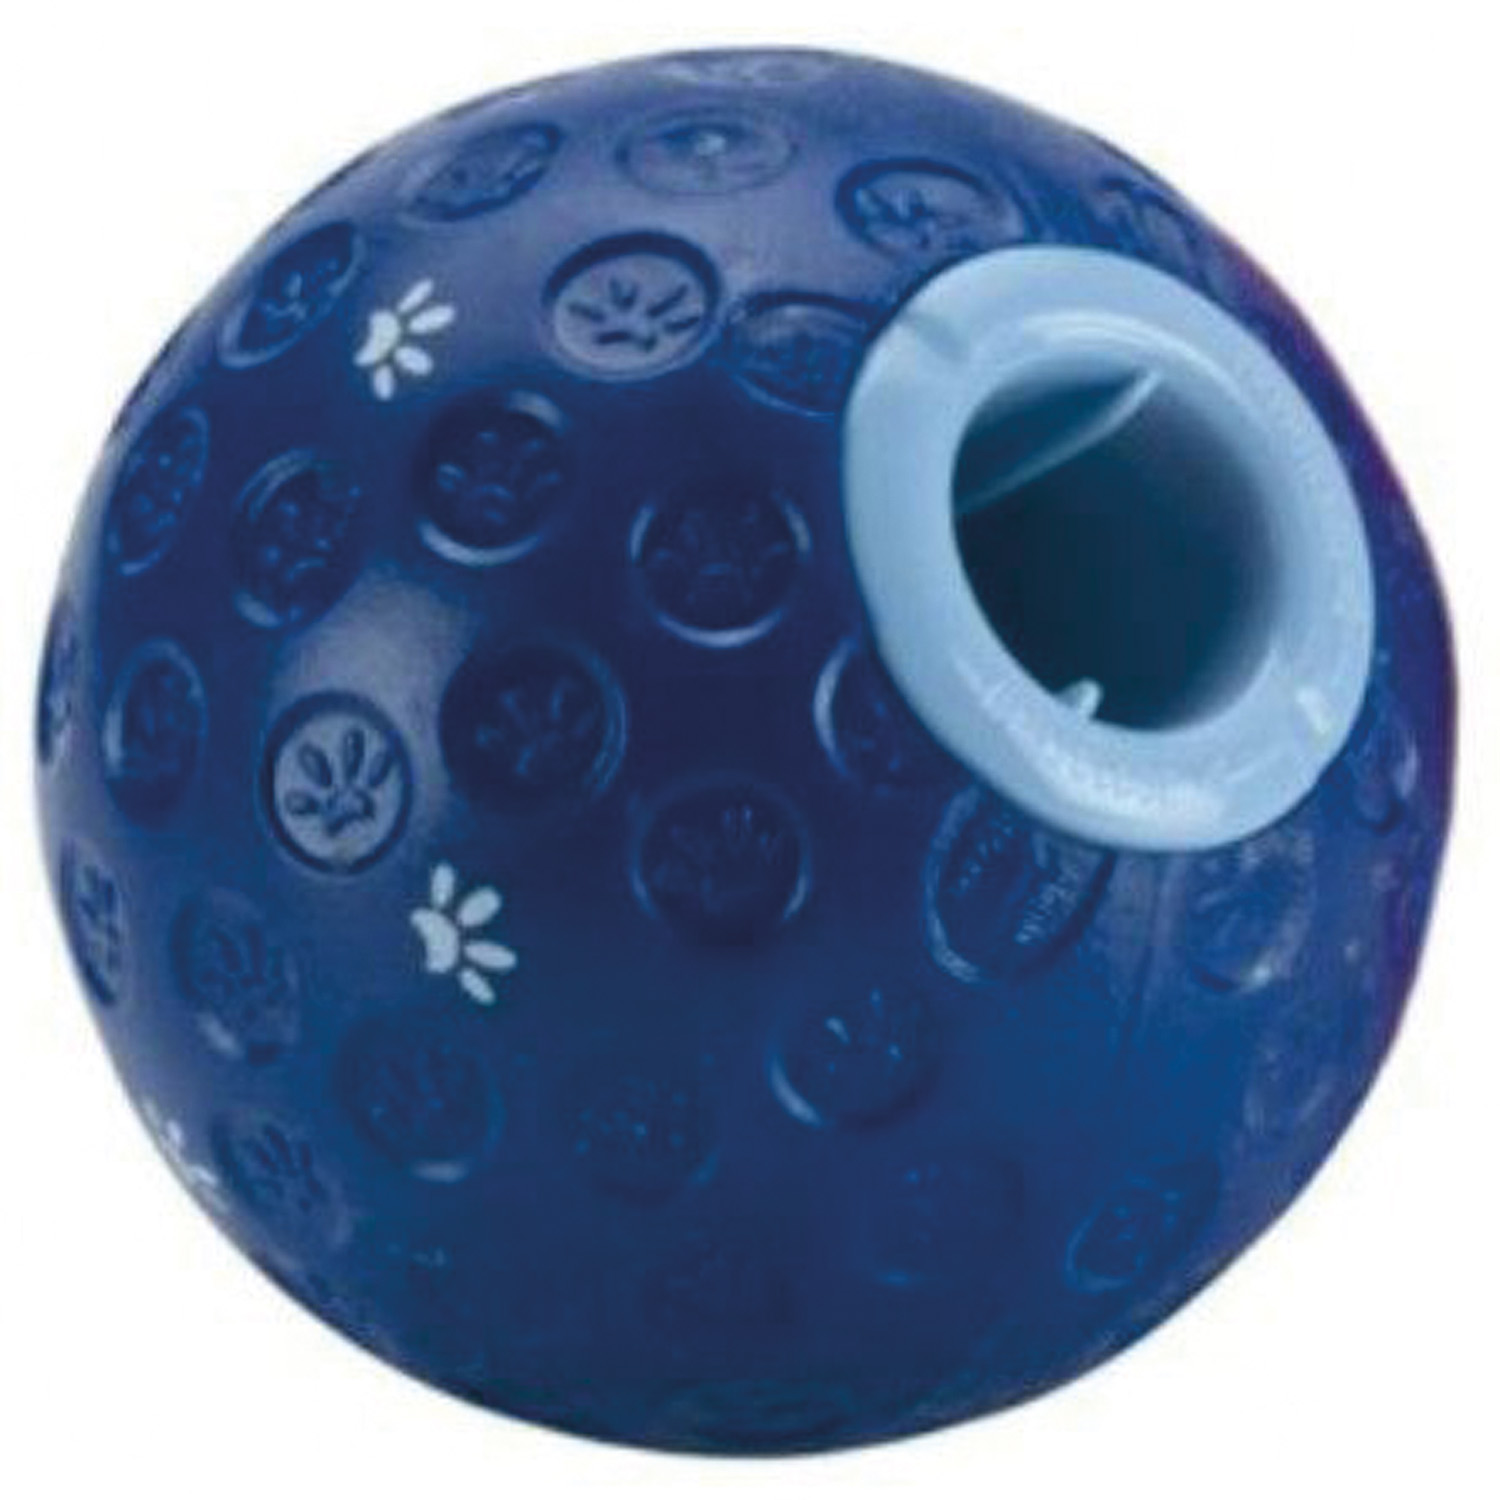 BUSTER TREAT BALL SMALL BLUE SMALL